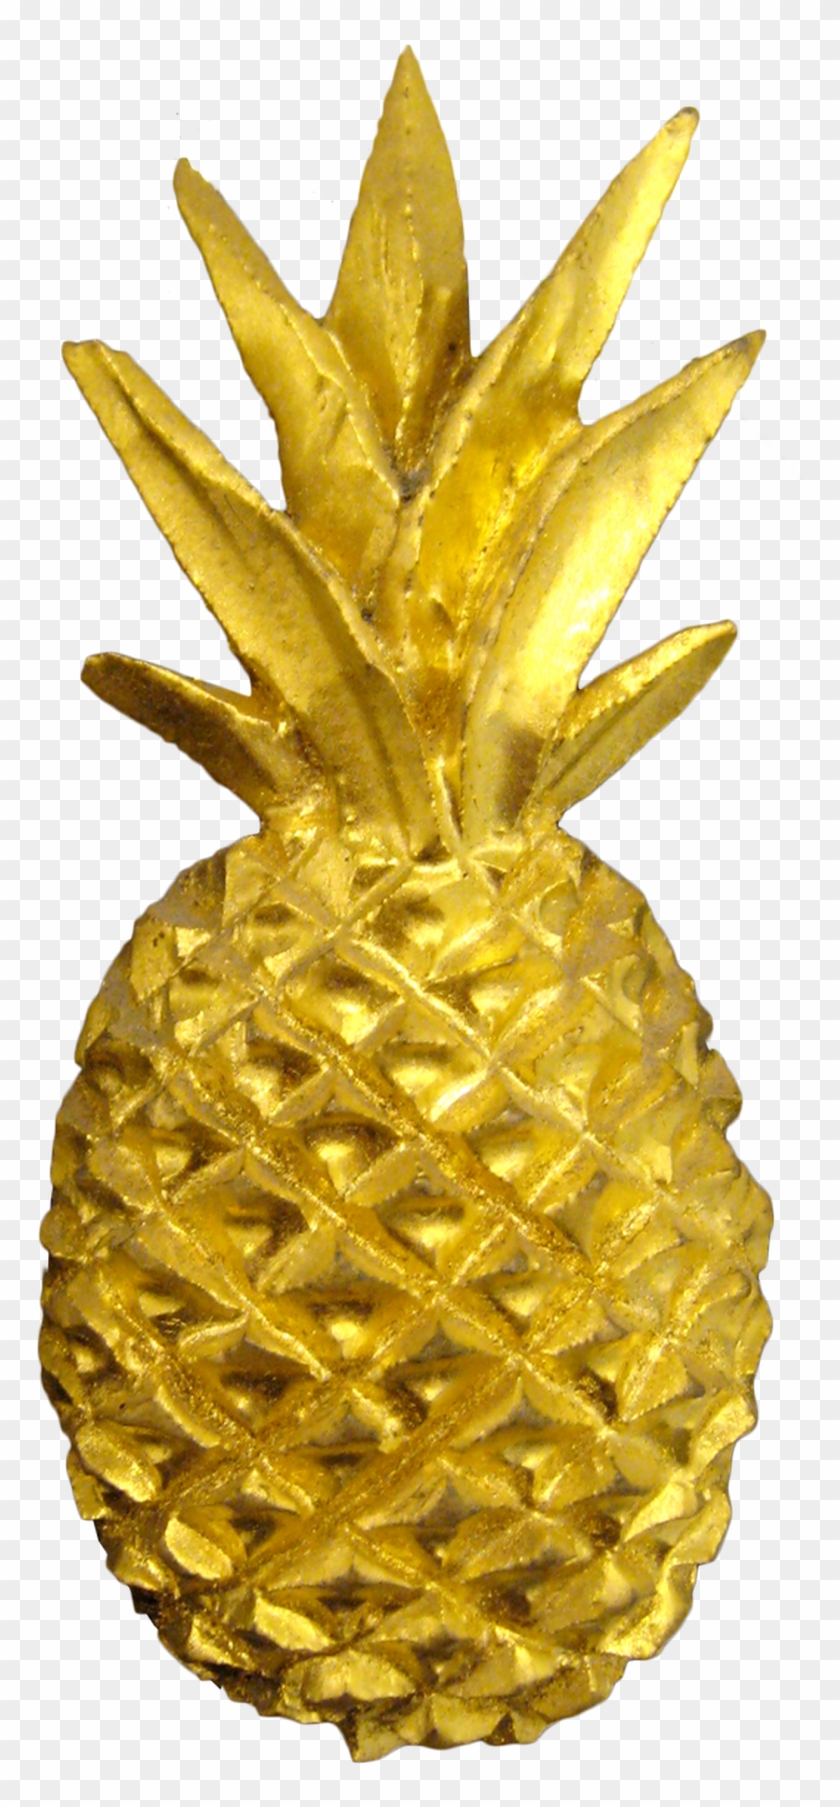 Chatham Sign Shop - Pineapple Clipart #5477851